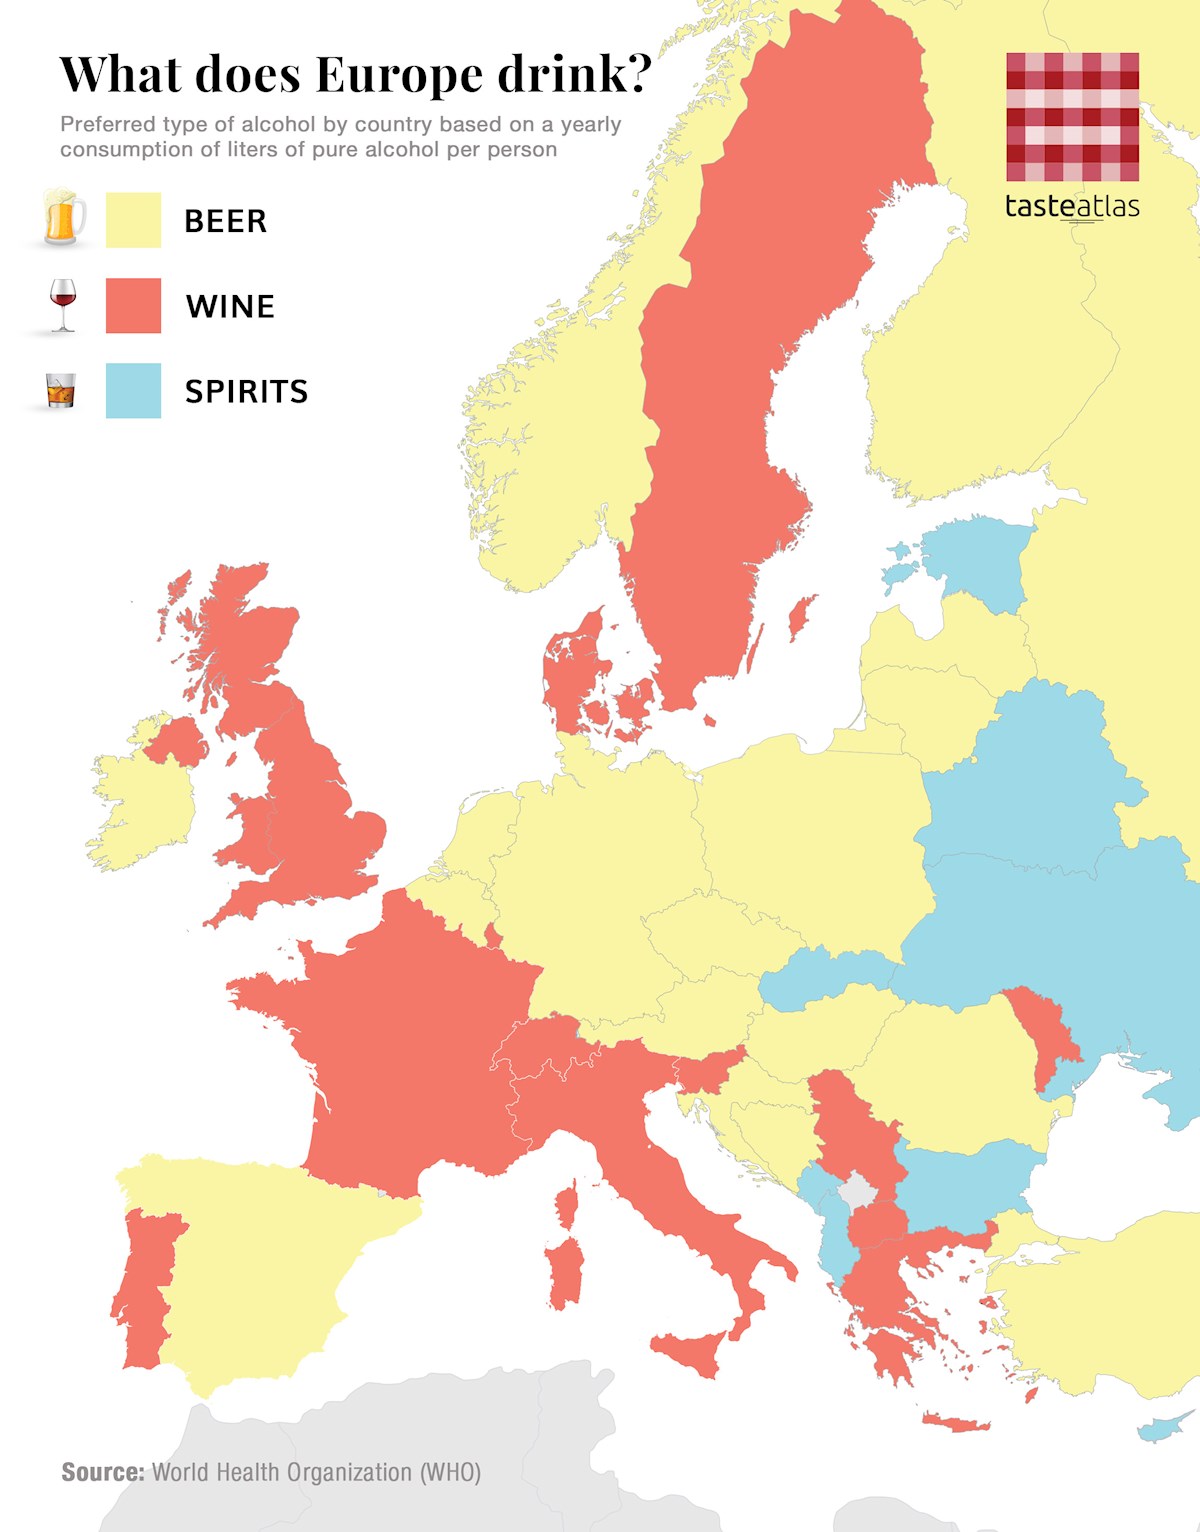 Preferred type of alcohol in each European country